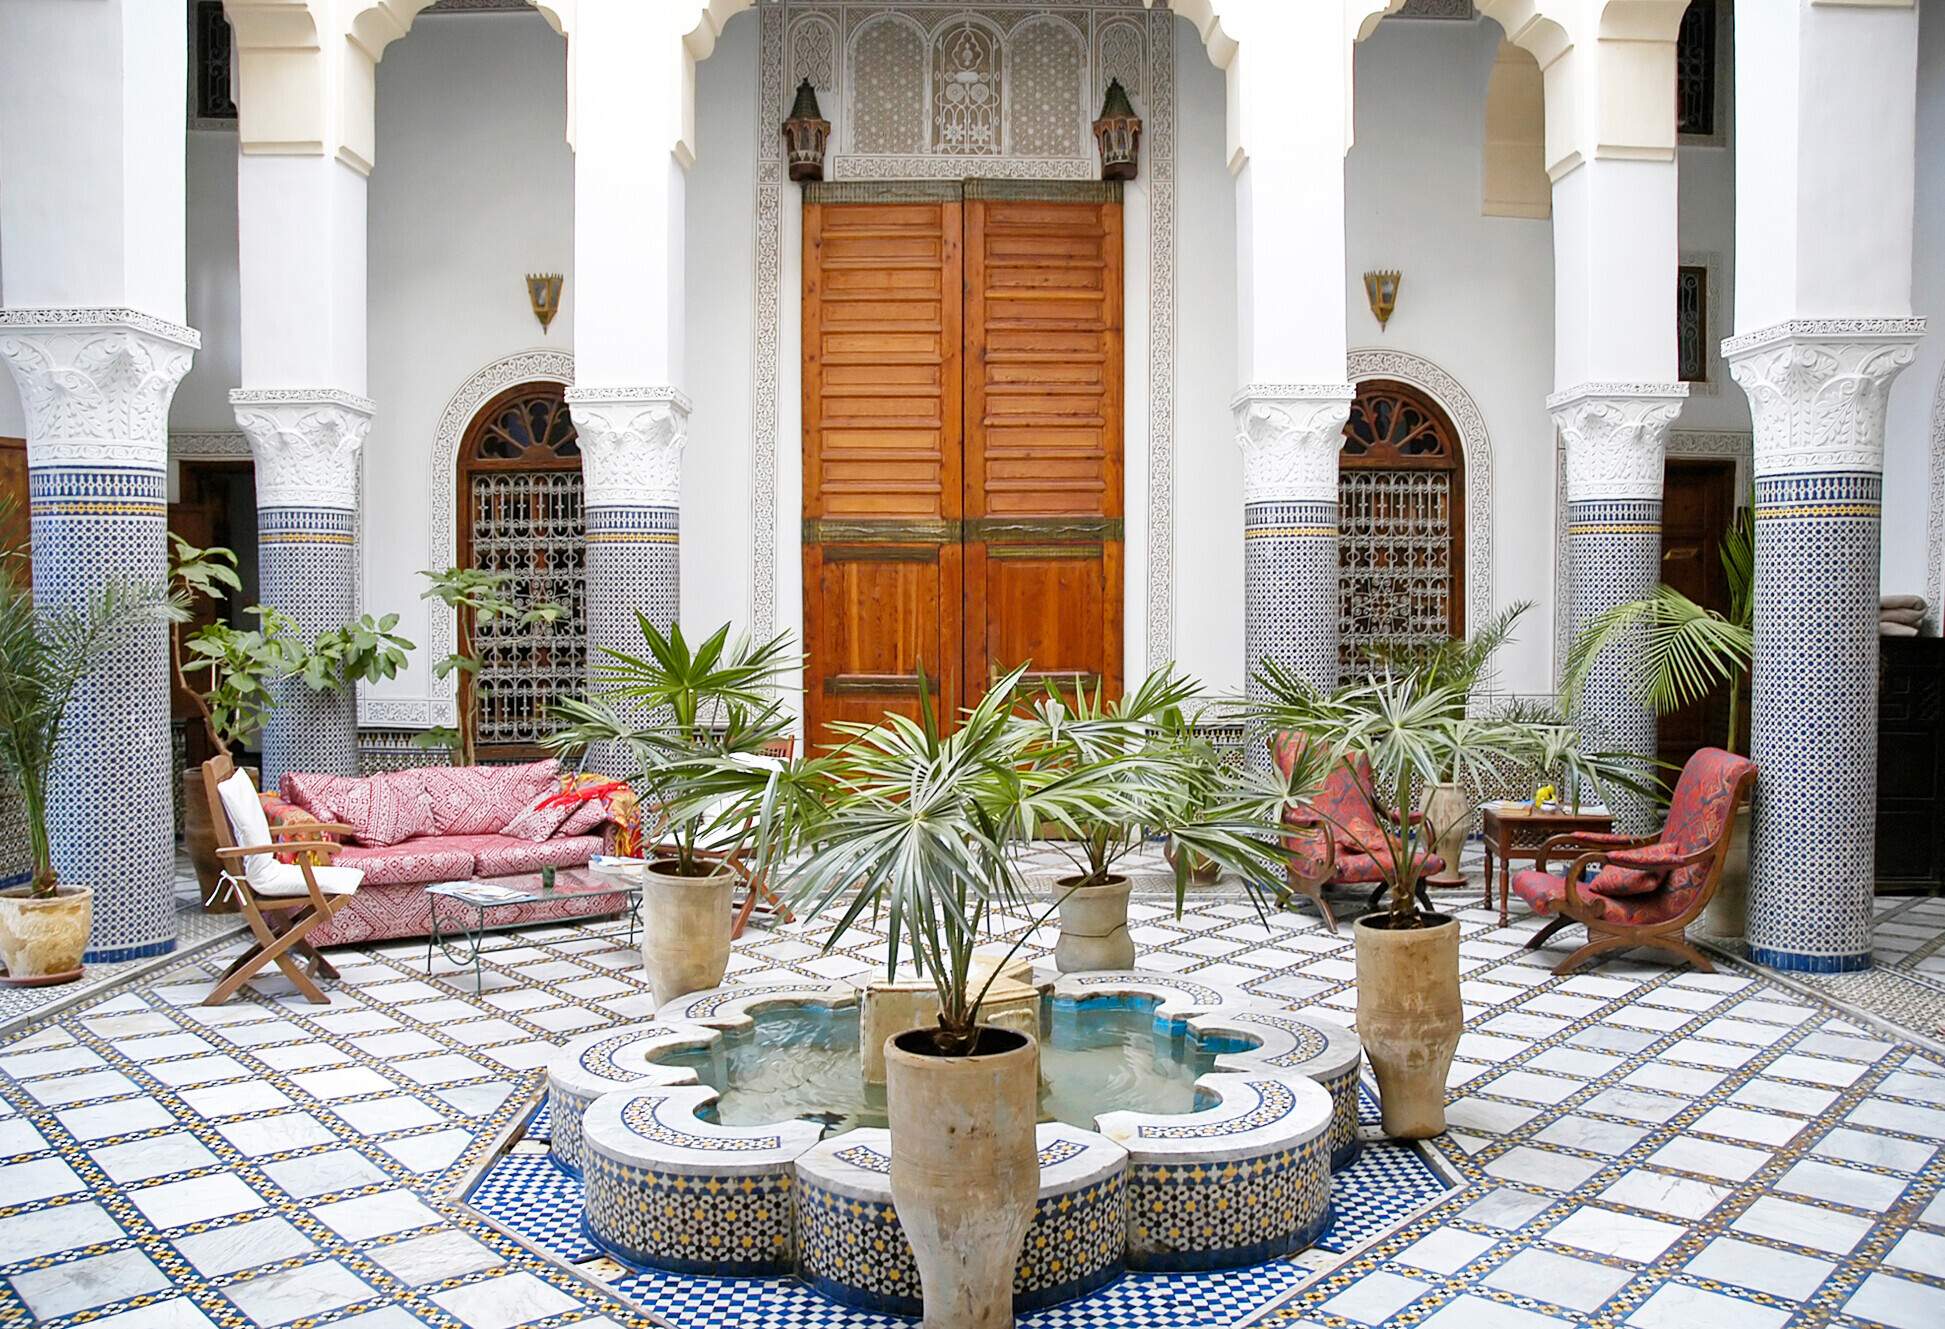 A traditional Moroccan house unfolds around a serene courtyard, where a fountain takes centre stage, surrounded by lush planters and graceful columns.